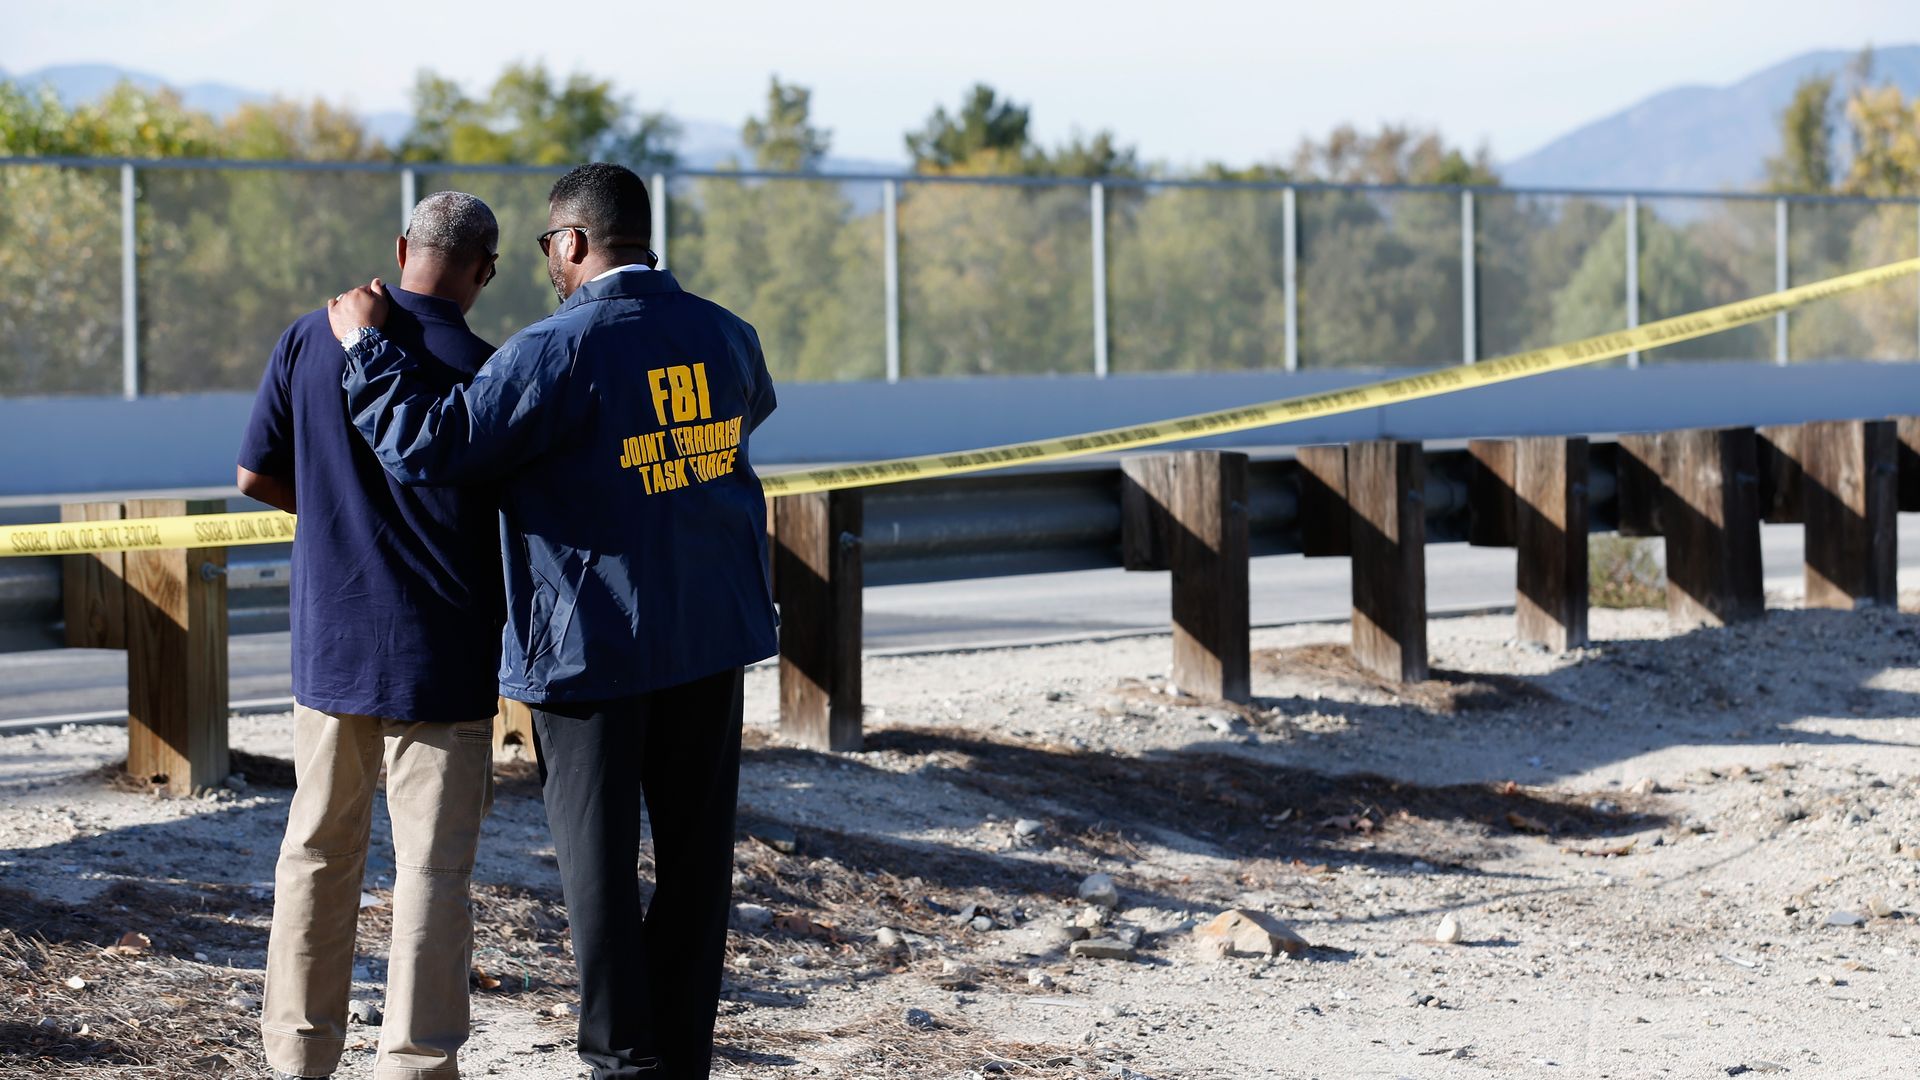  Members of the FBI Joint Terrorism Task Force stand outside of a press conference regarding the shooting that occurred at the Inland Regional Center 